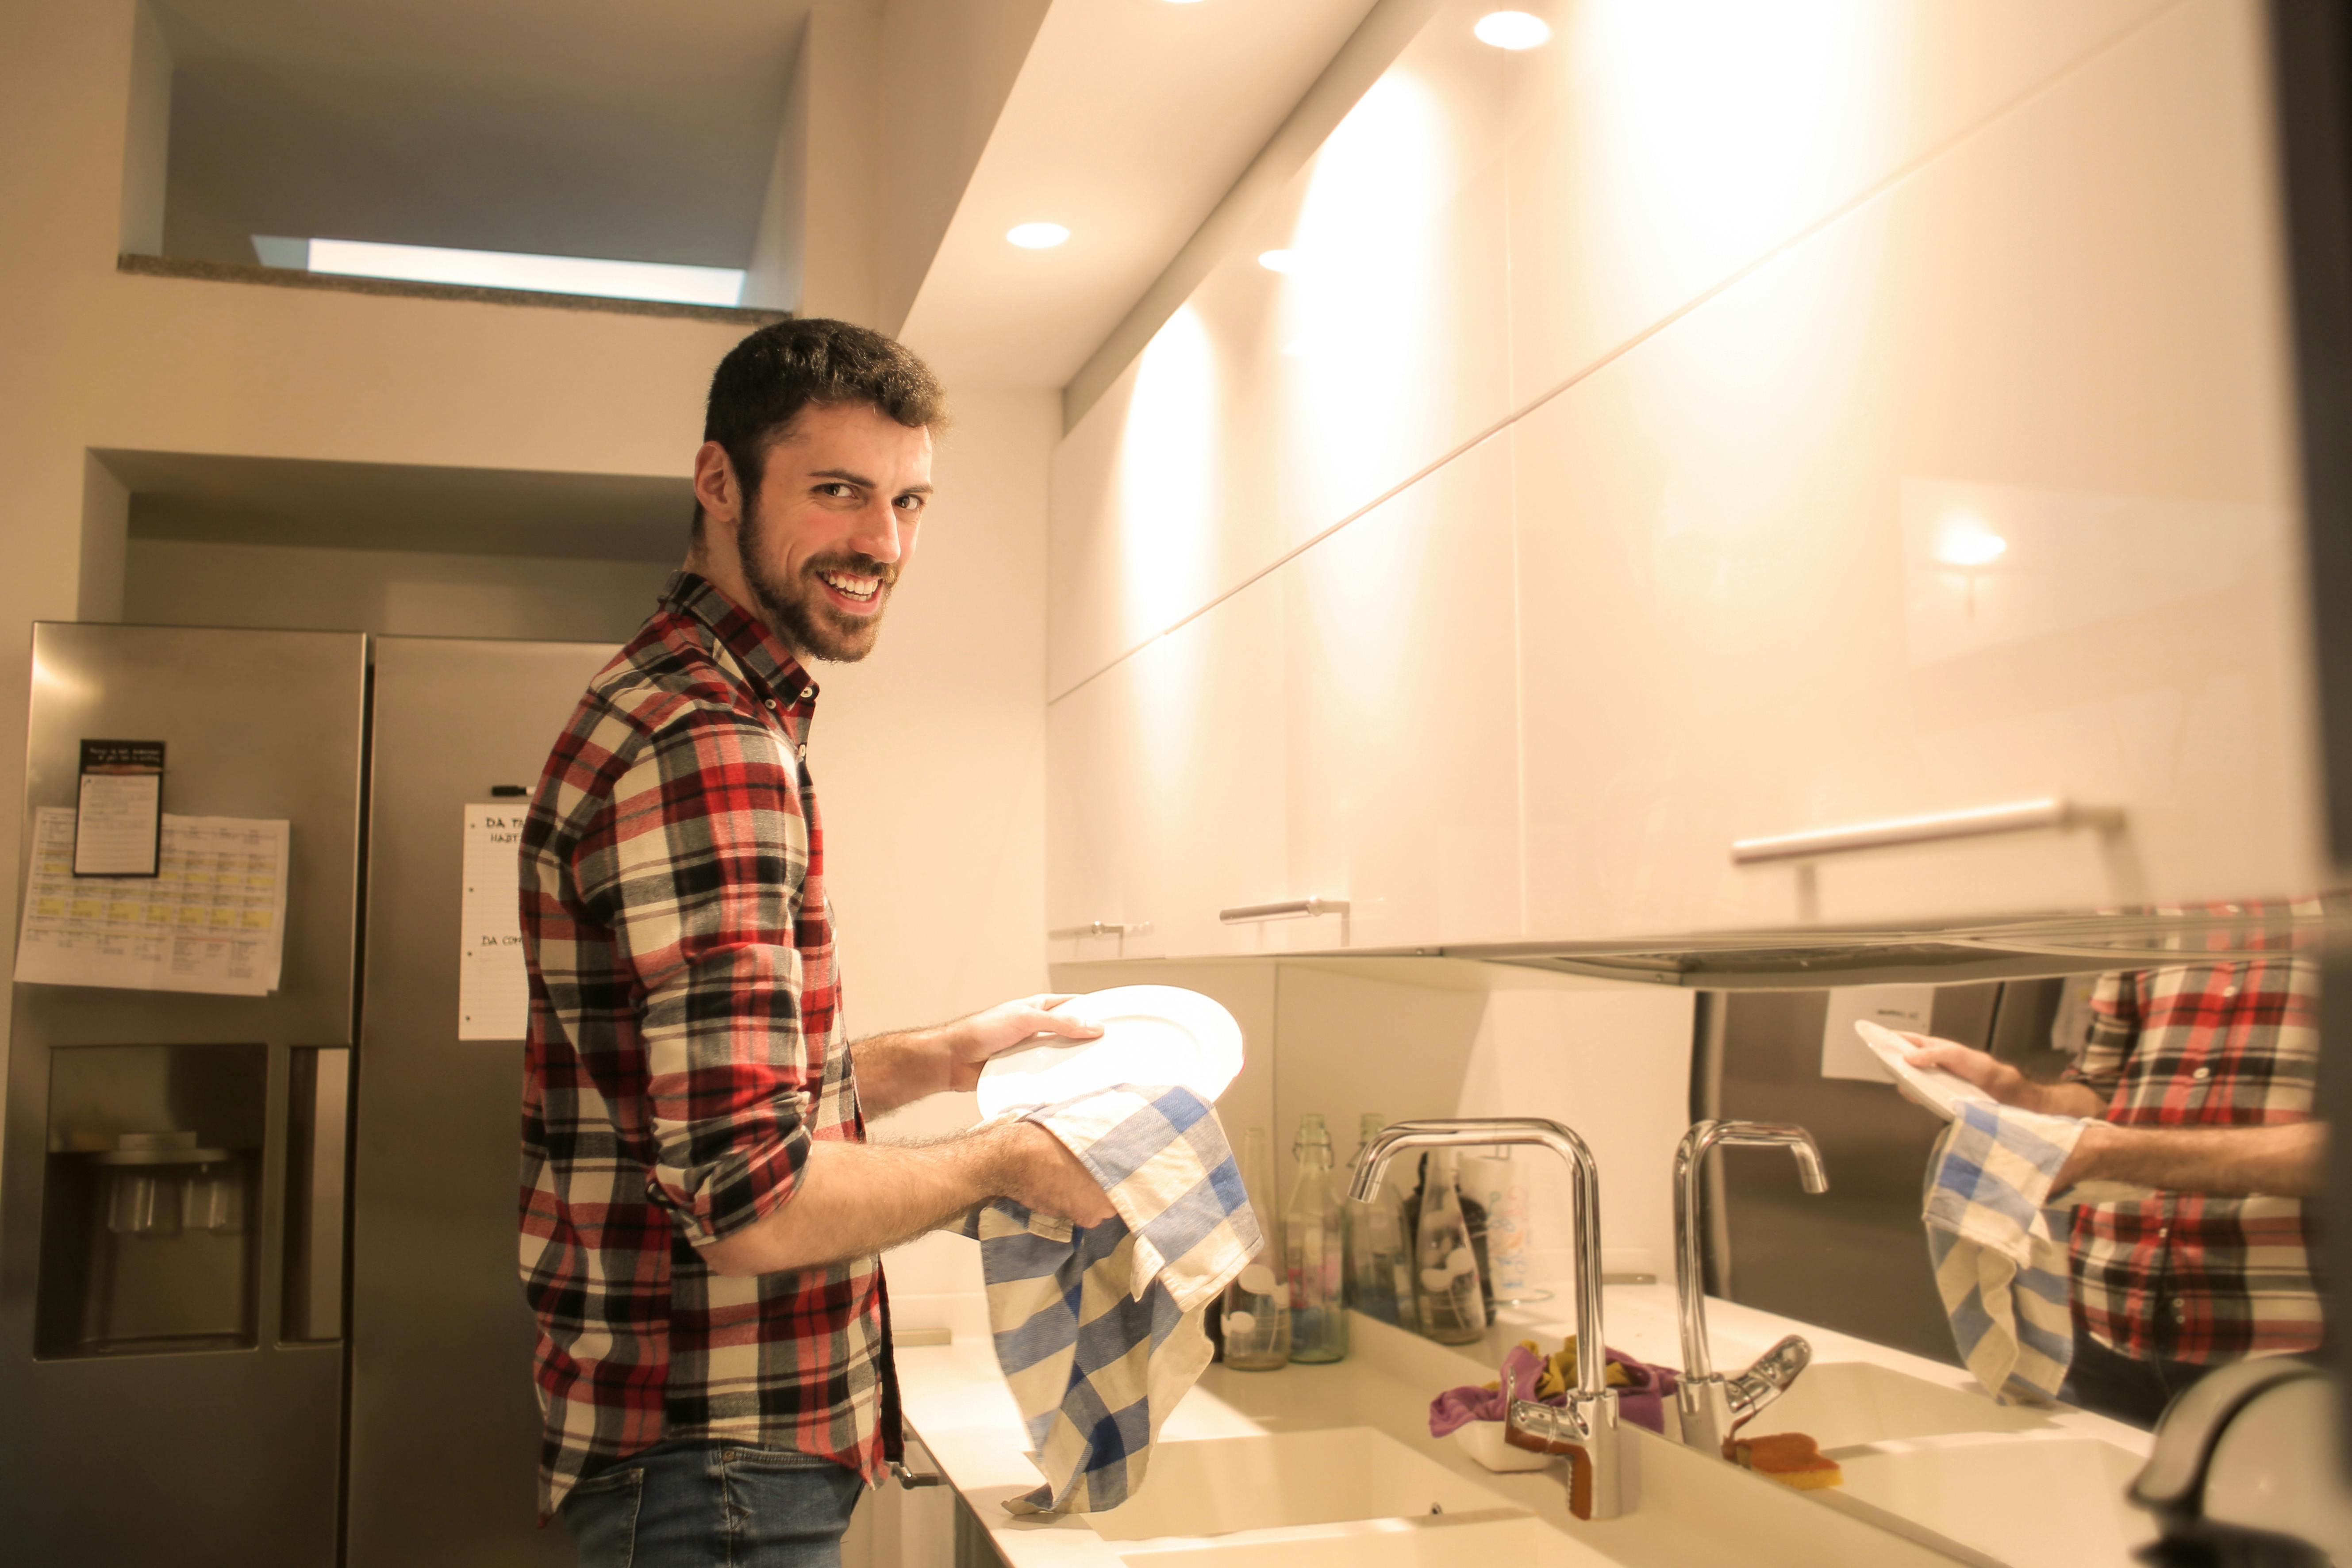 Man smiling as he does the dishes | Source: Pexels